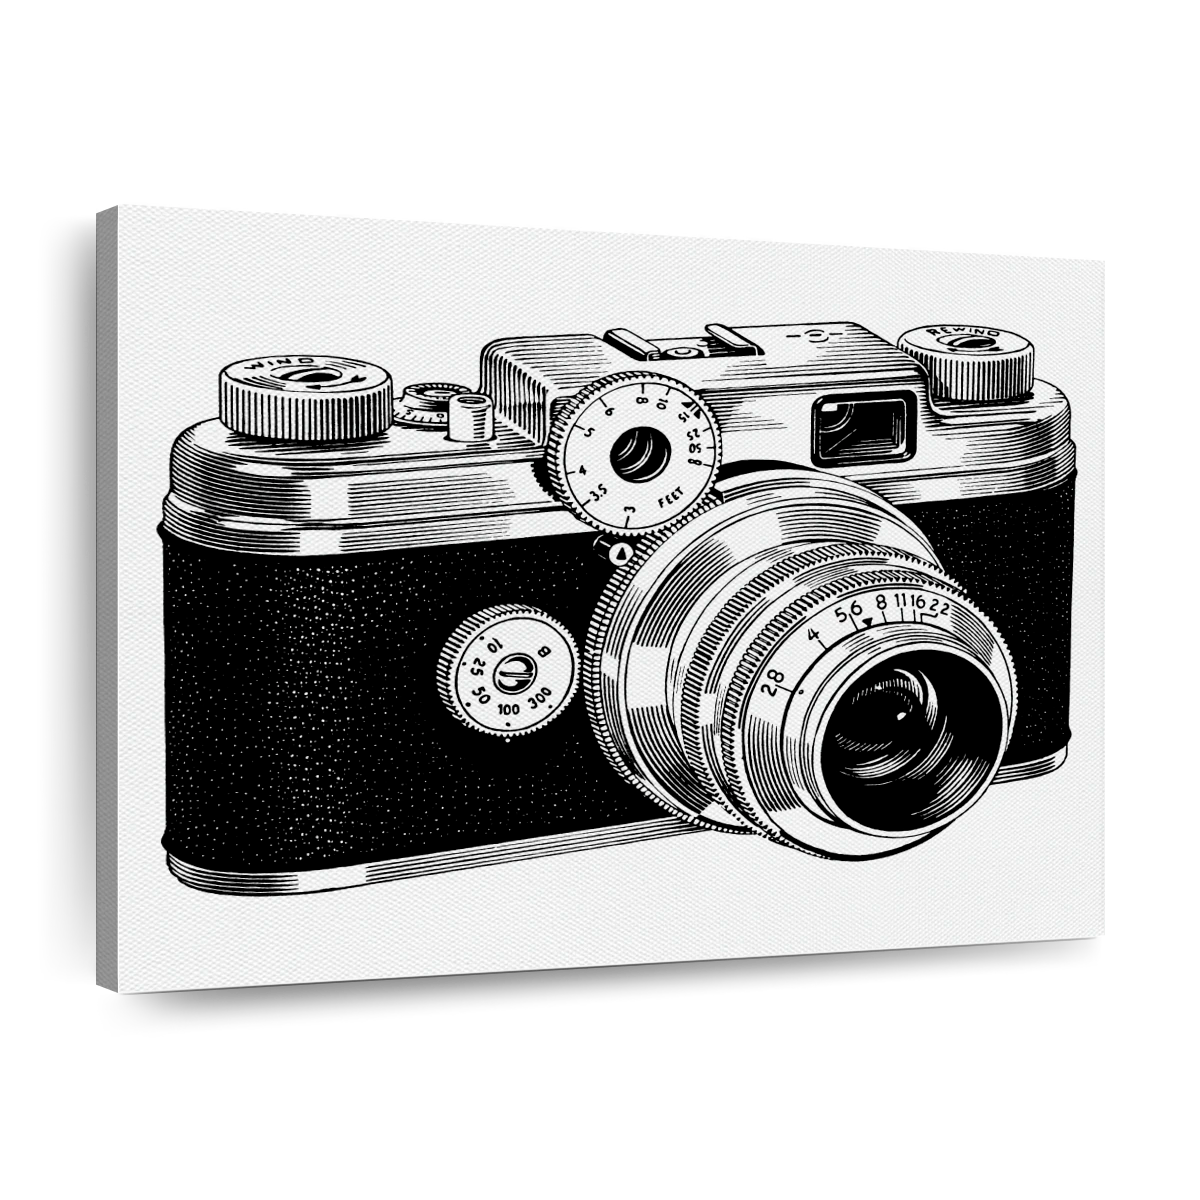 24 x 36 Gallery-Wrapped Canvas - 1.5 - George's Camera